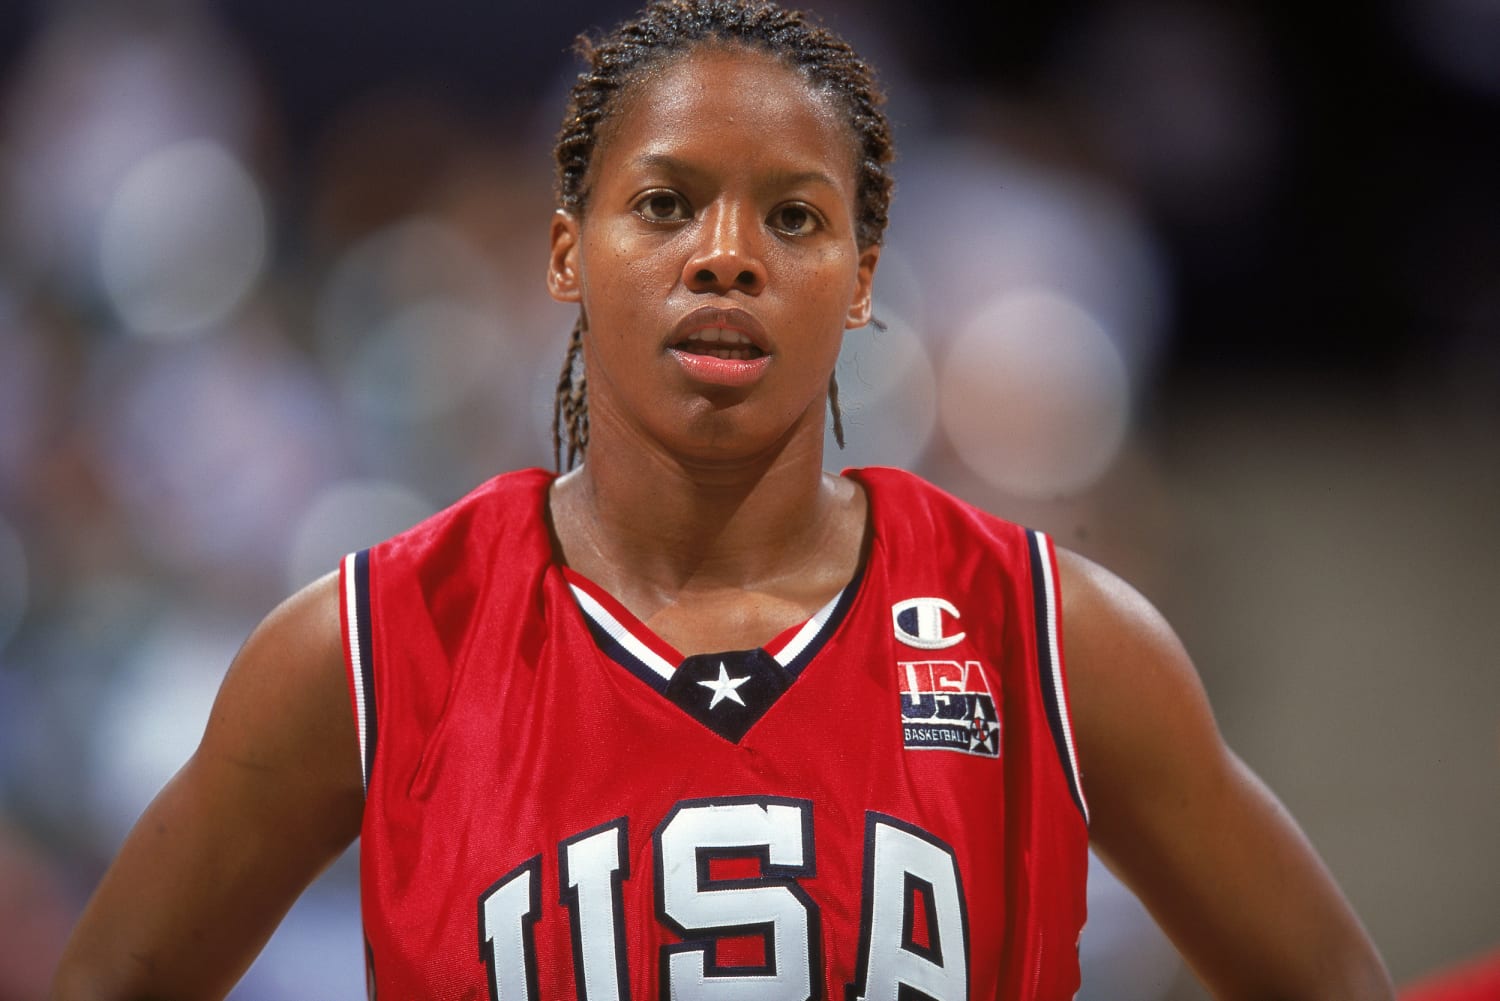 Women's basketball star won two Olympic golds, inducted into